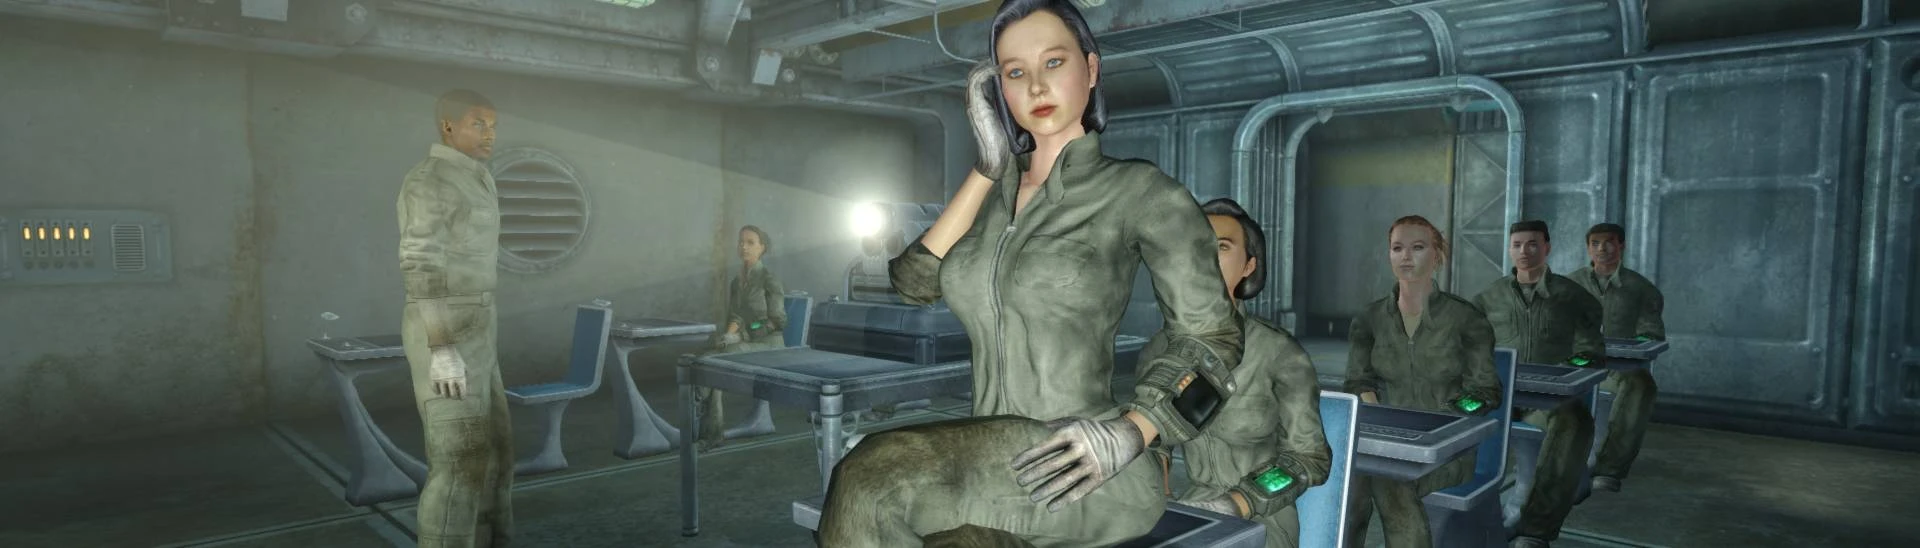 bruno candido recommends Fallout 3 Nude Mods